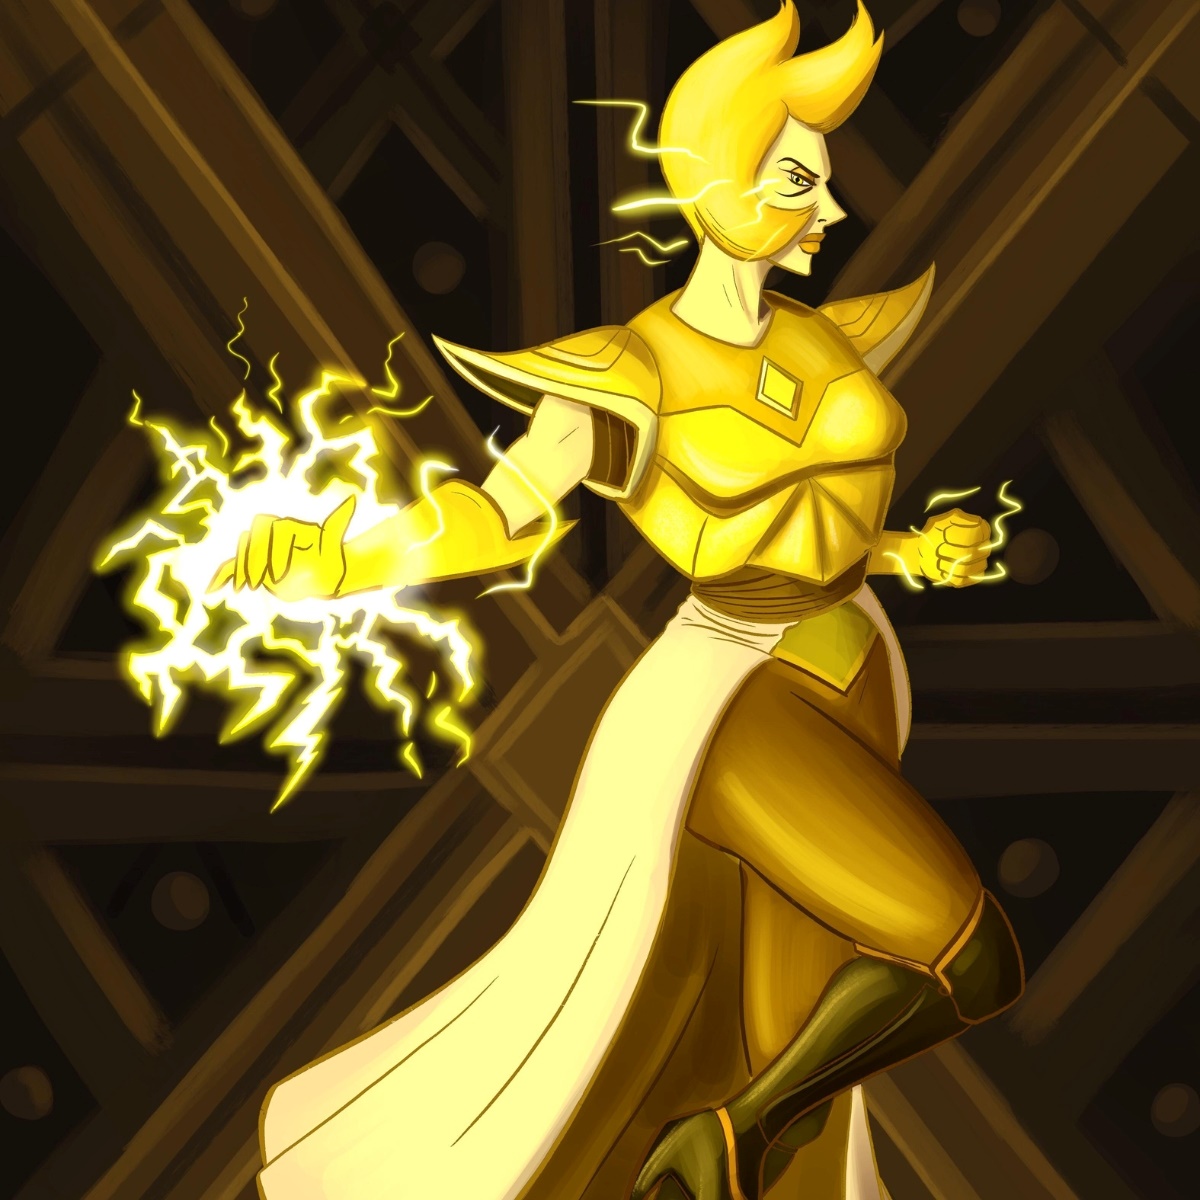 14-facts-about-yellow-diamond-steven-universe